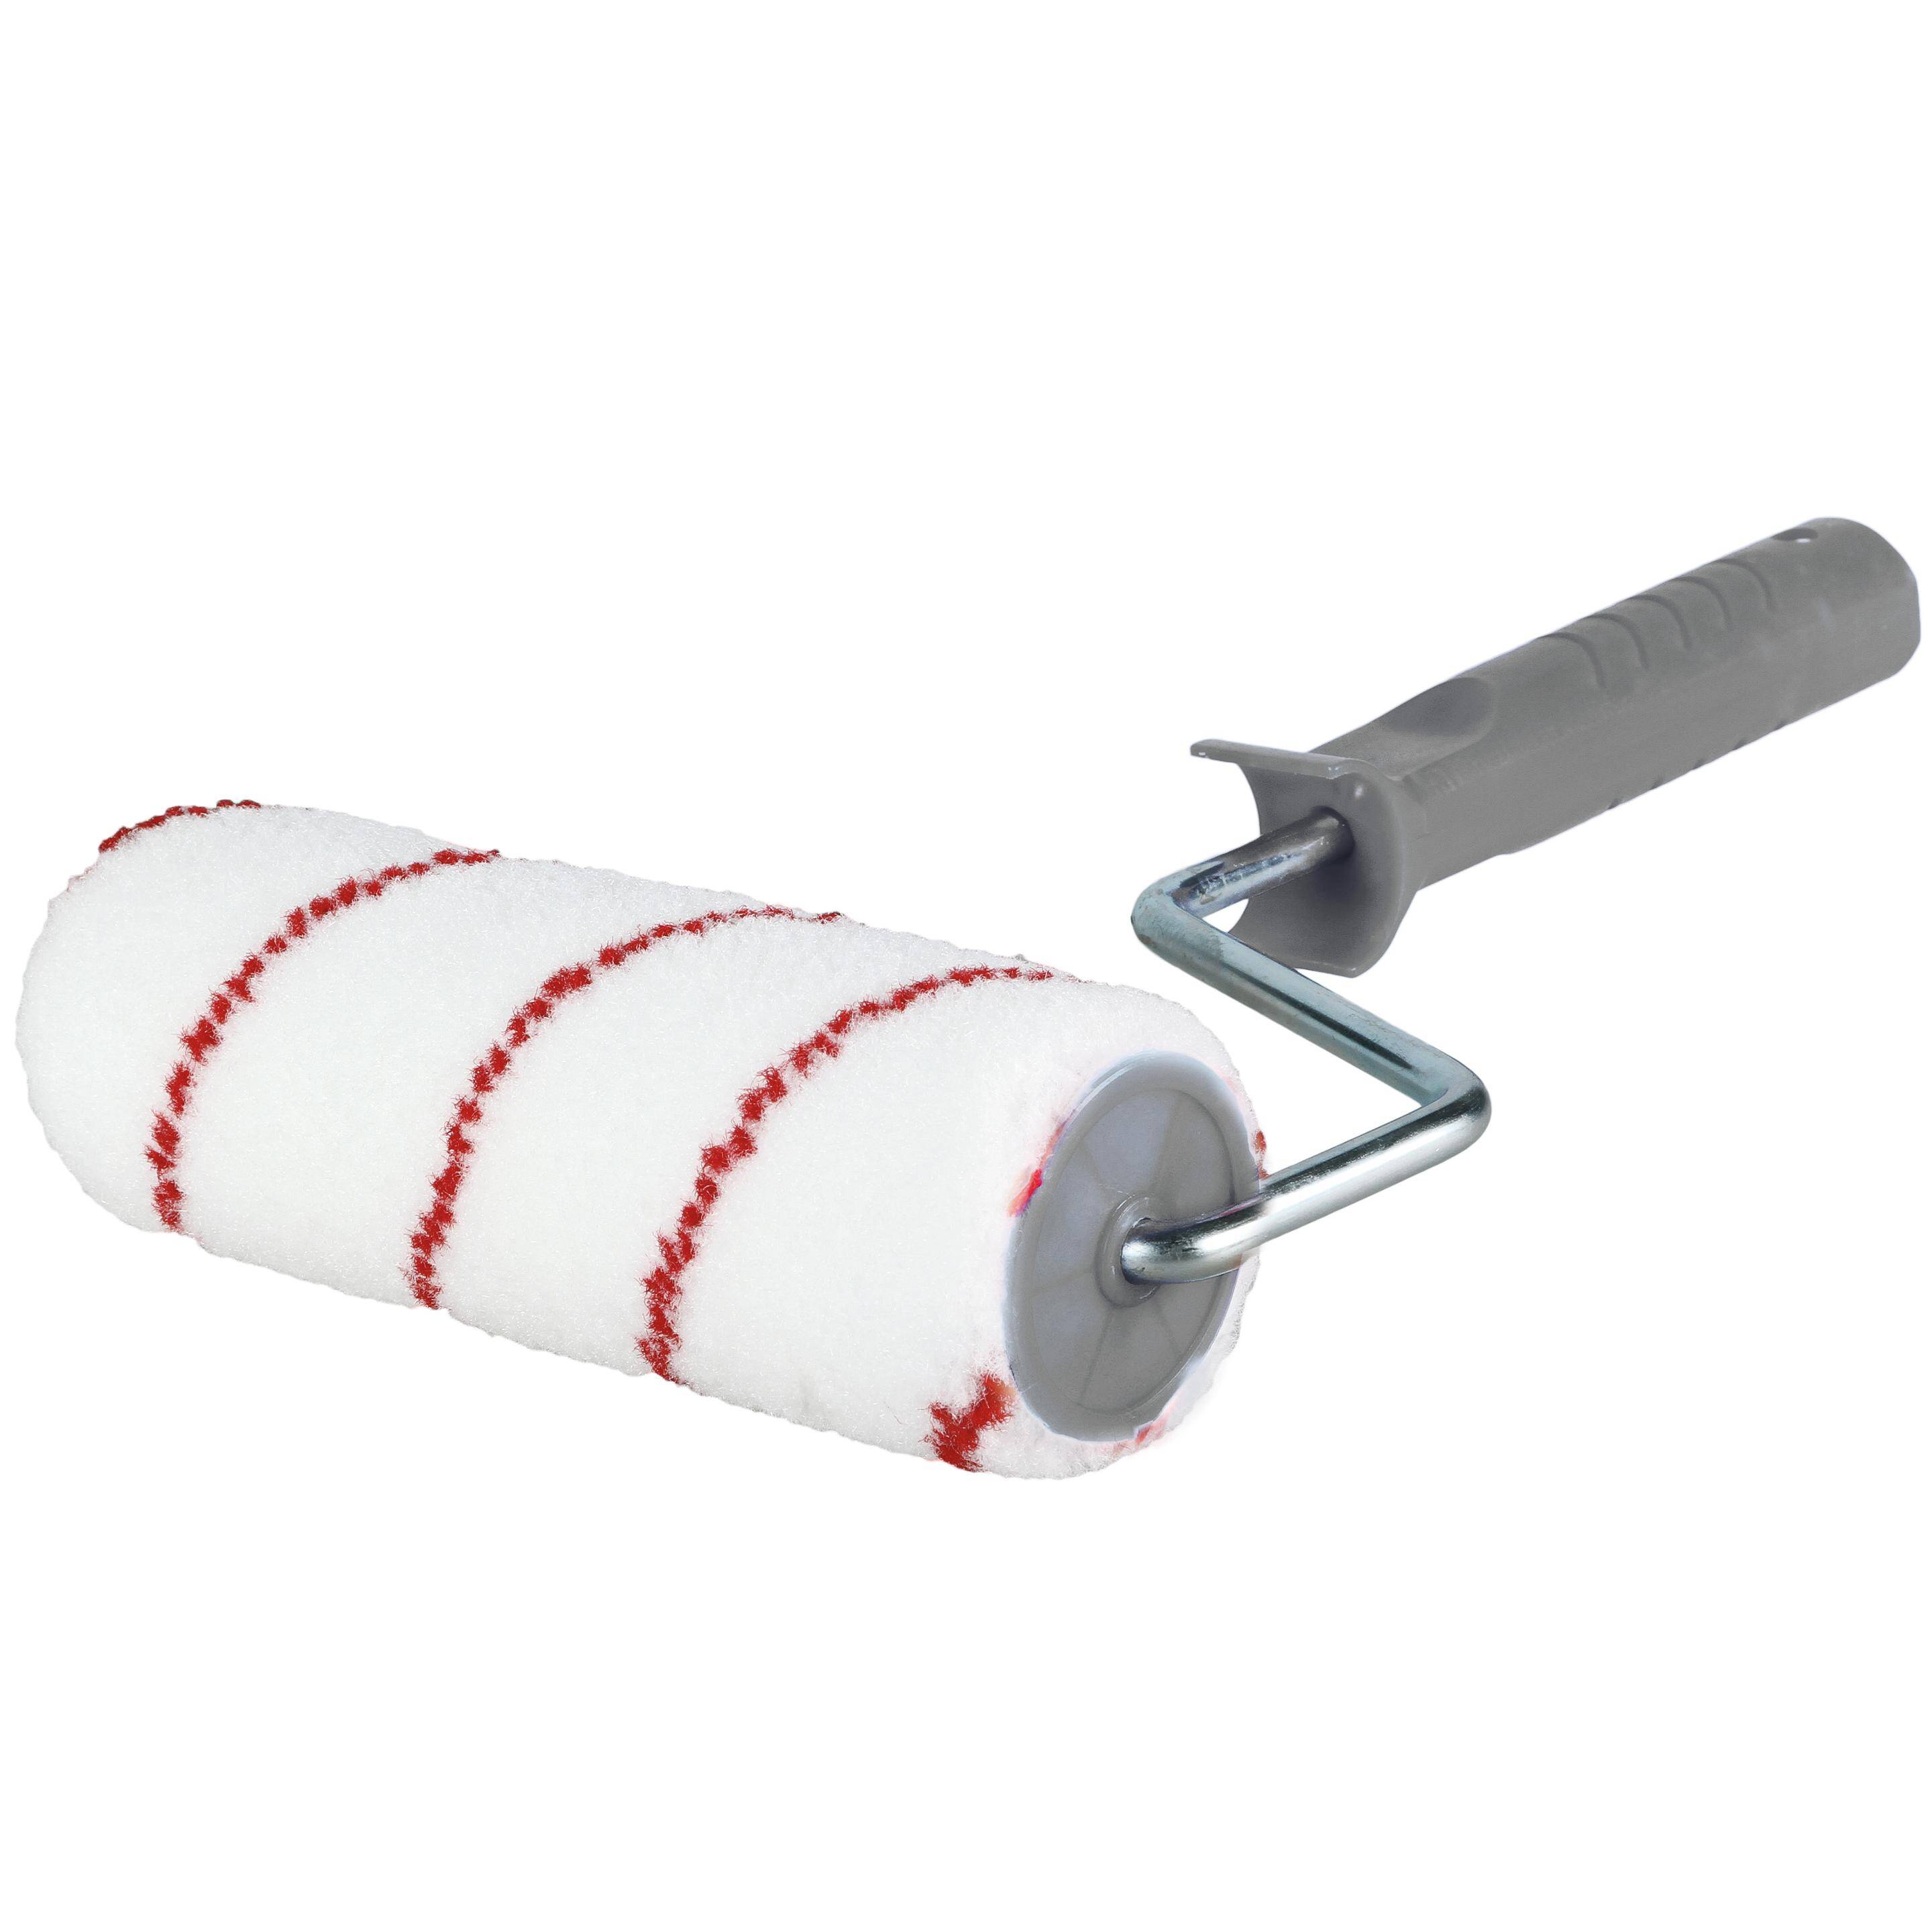 NYLON roller complete with frame 18 CM